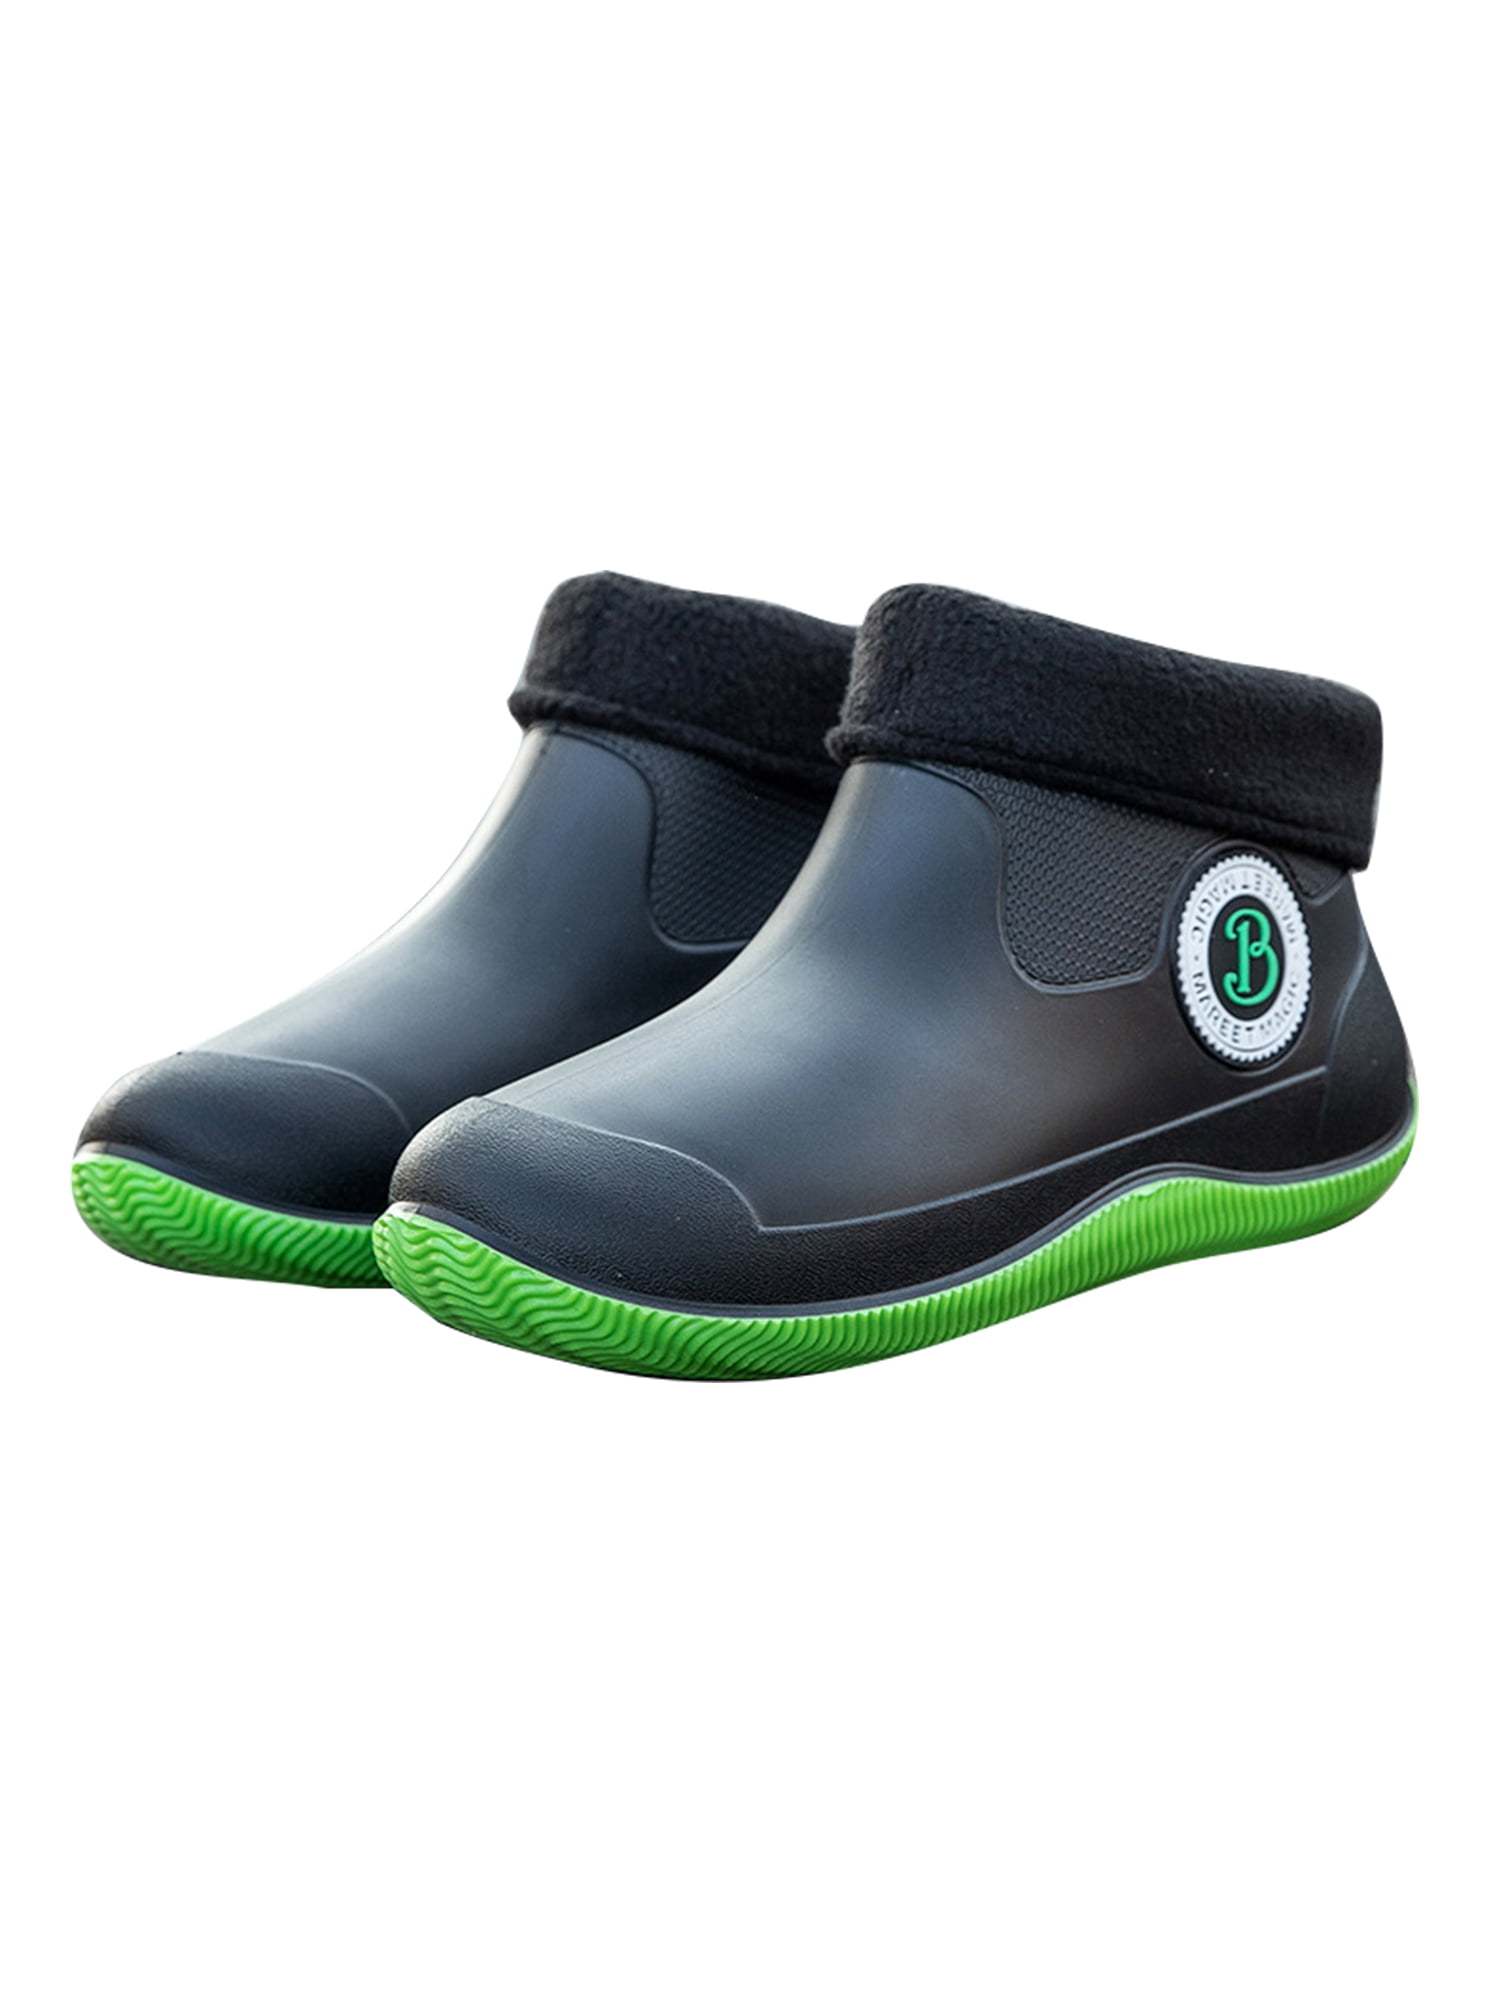 Gomelly Ankle Deck Boots for Men Waterproof Rain Shoes Plush